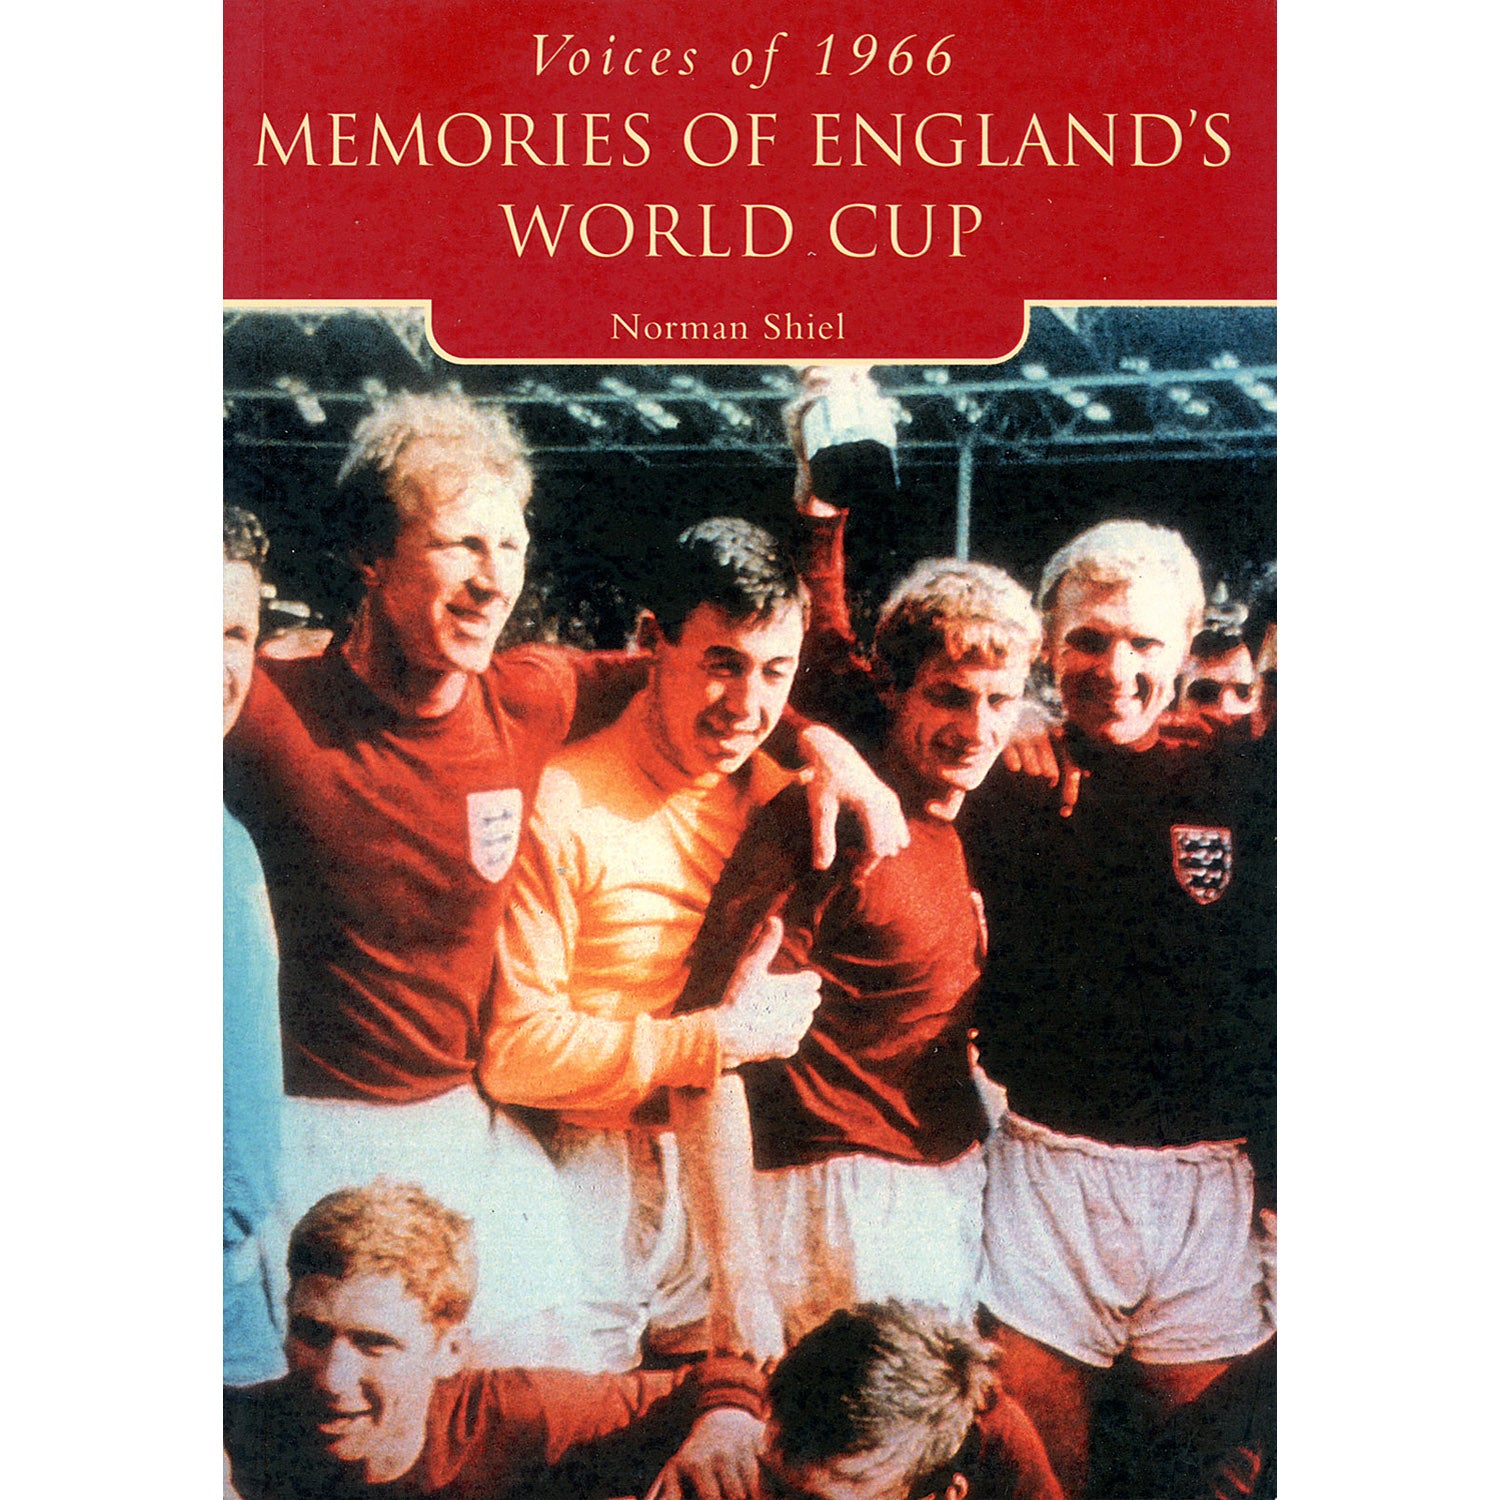 Voices of 1966 – Memories of England's World Cup